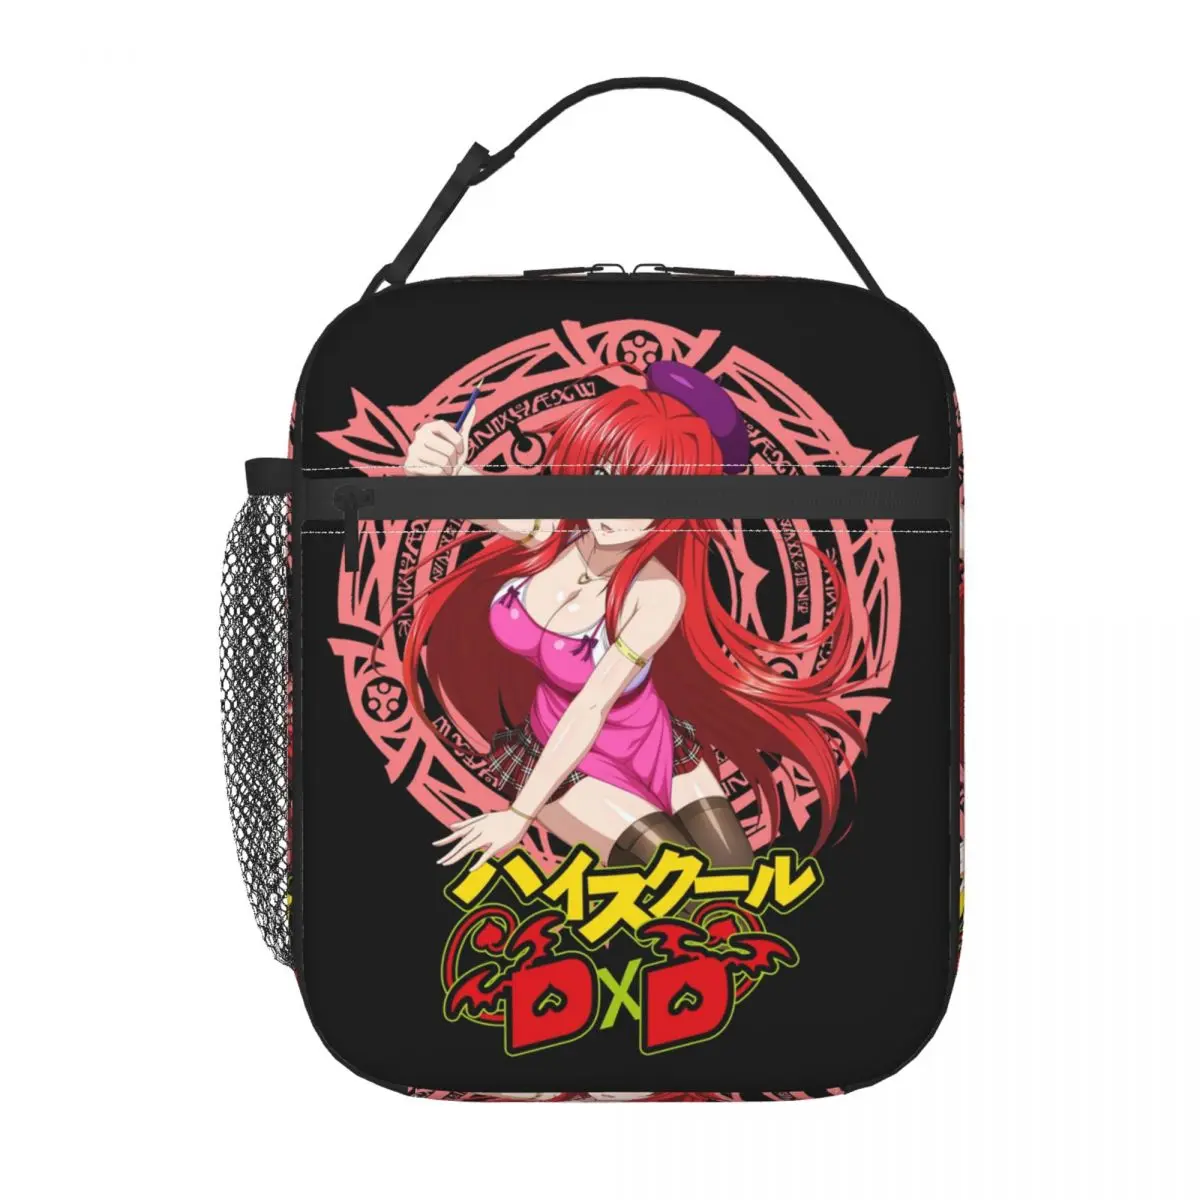 

Rias Gremory Love High School DxD Anime Japanese Name Insulated Lunch Bags for Women Portable Thermal Cooler Food Lunch Box